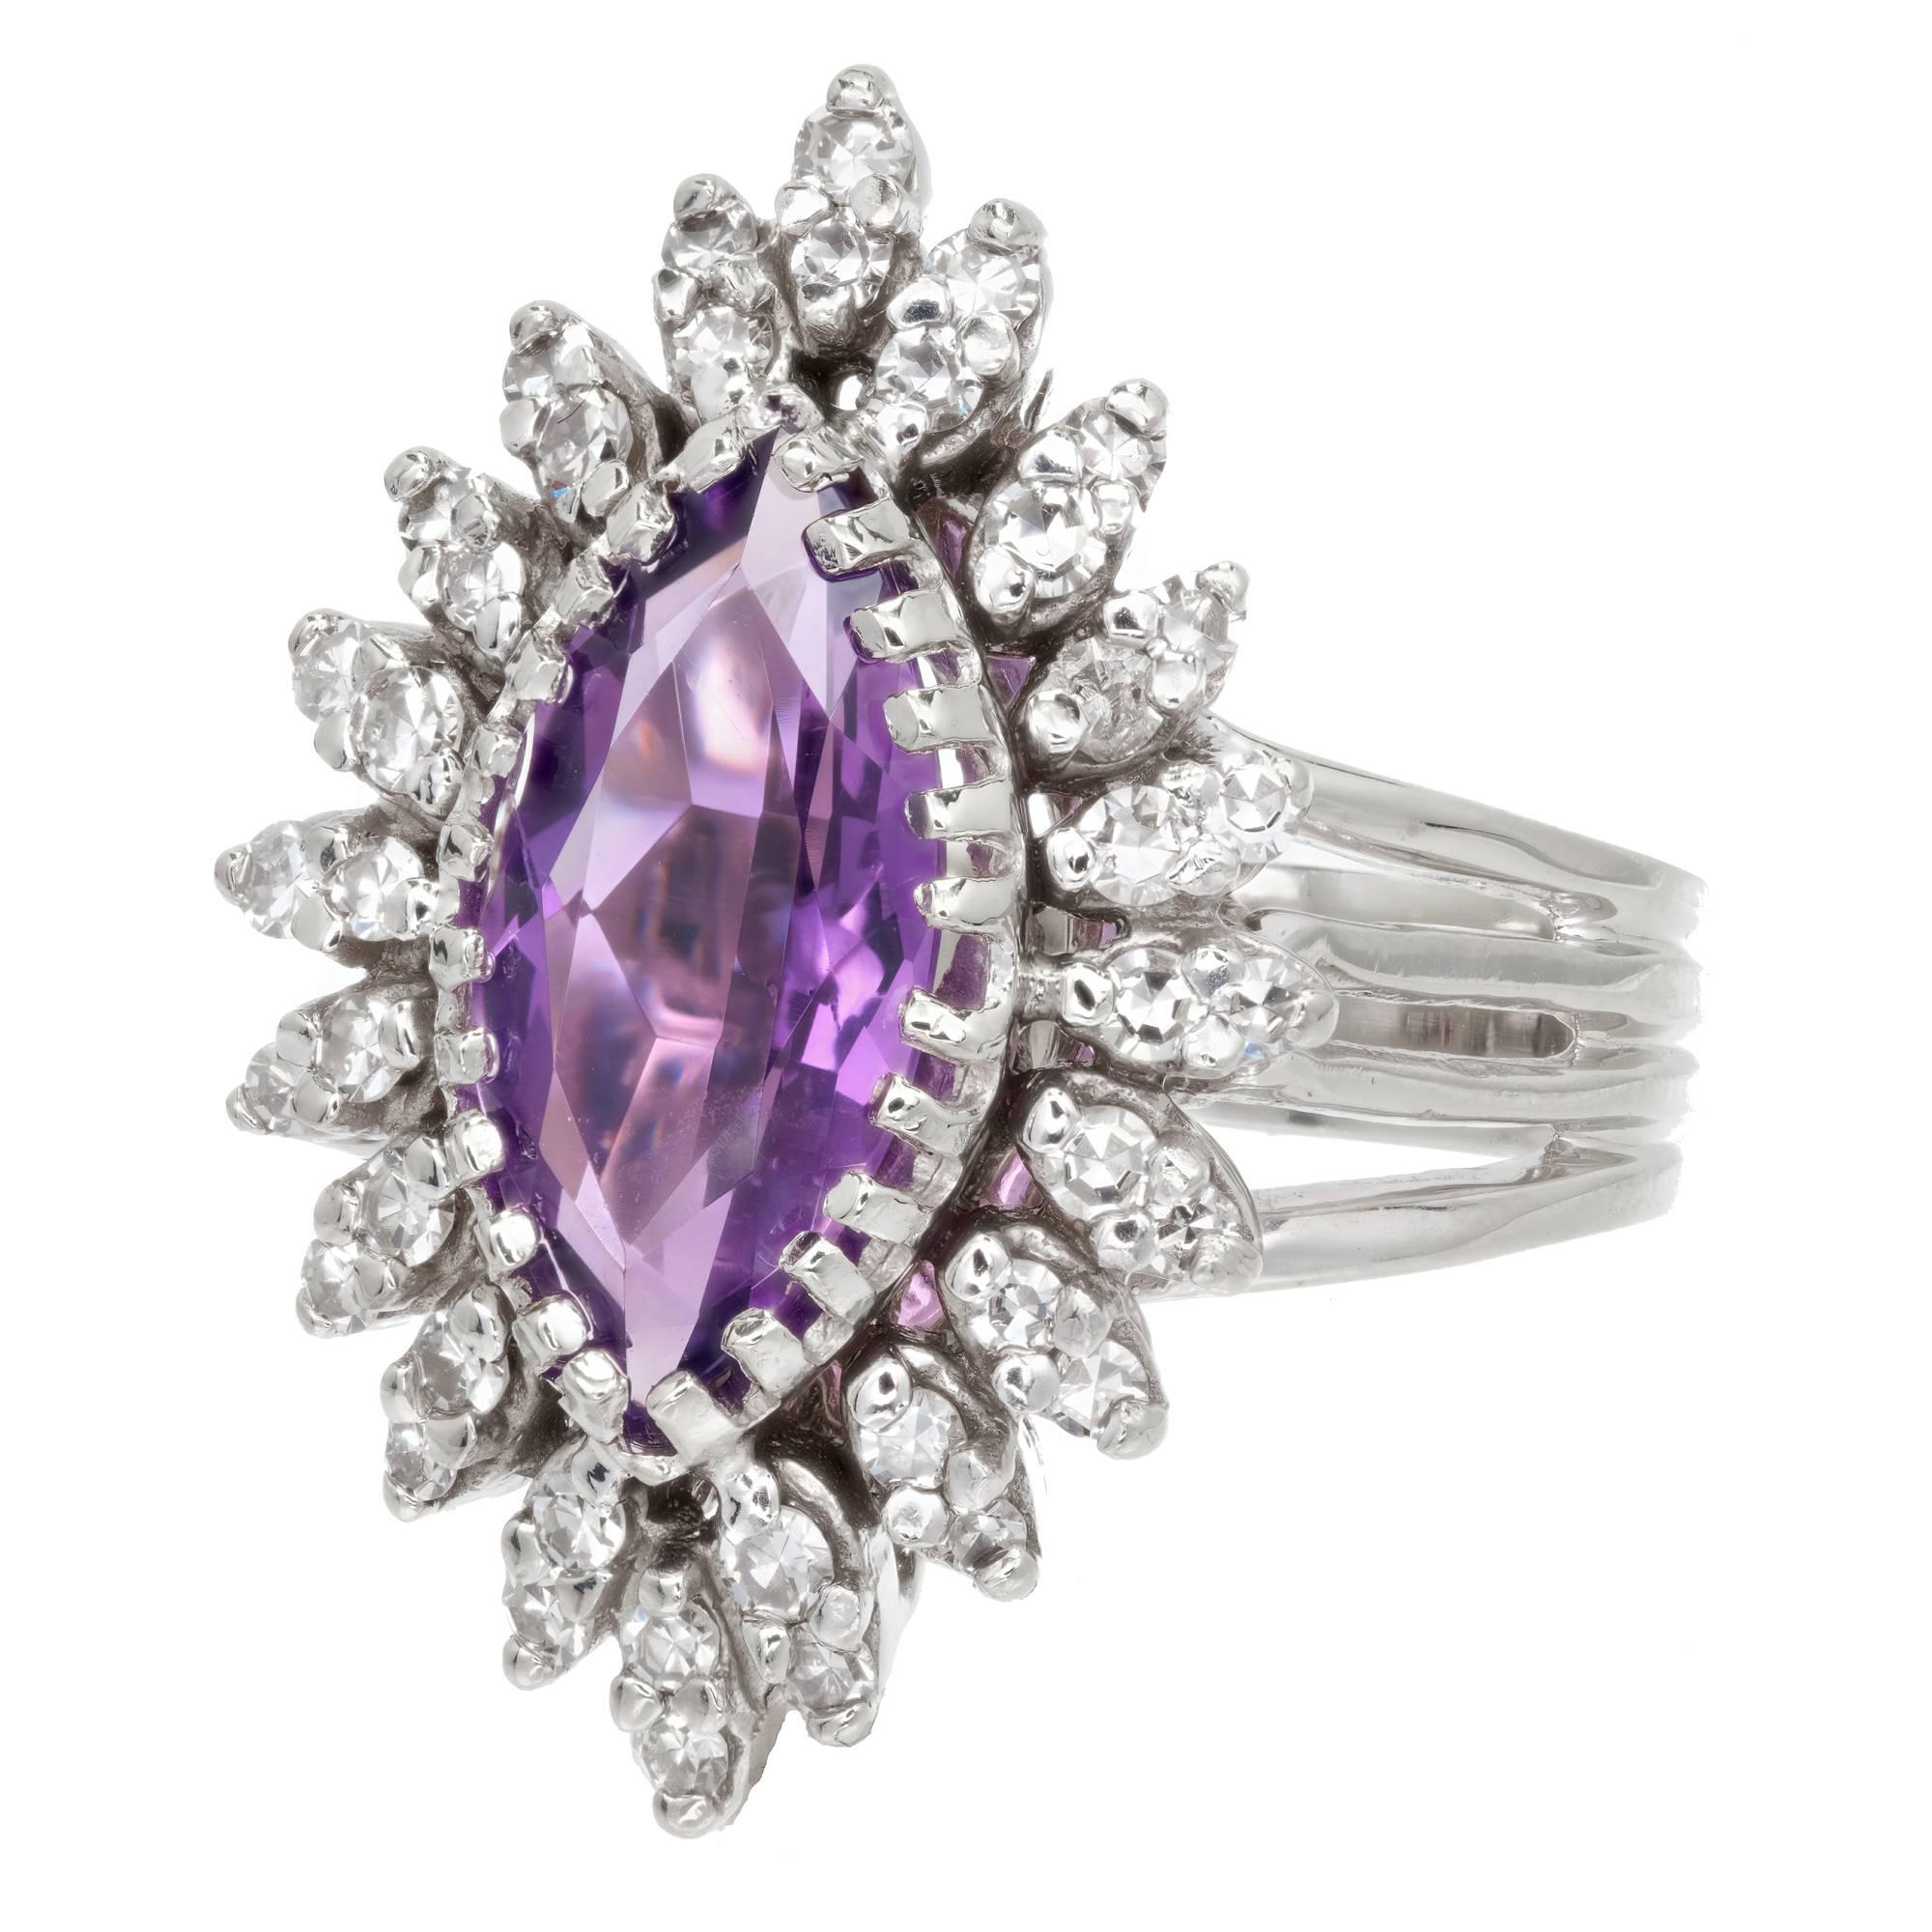 Mid-Century 1950s Marquis amethyst diamond halo cocktail ring with bright white single cut Diamonds in 2 rows surrounding a bright purple Marquise Amethyst center in a 14k white gold setting. 

1 Marquise purple Amethyst, approx. total weight